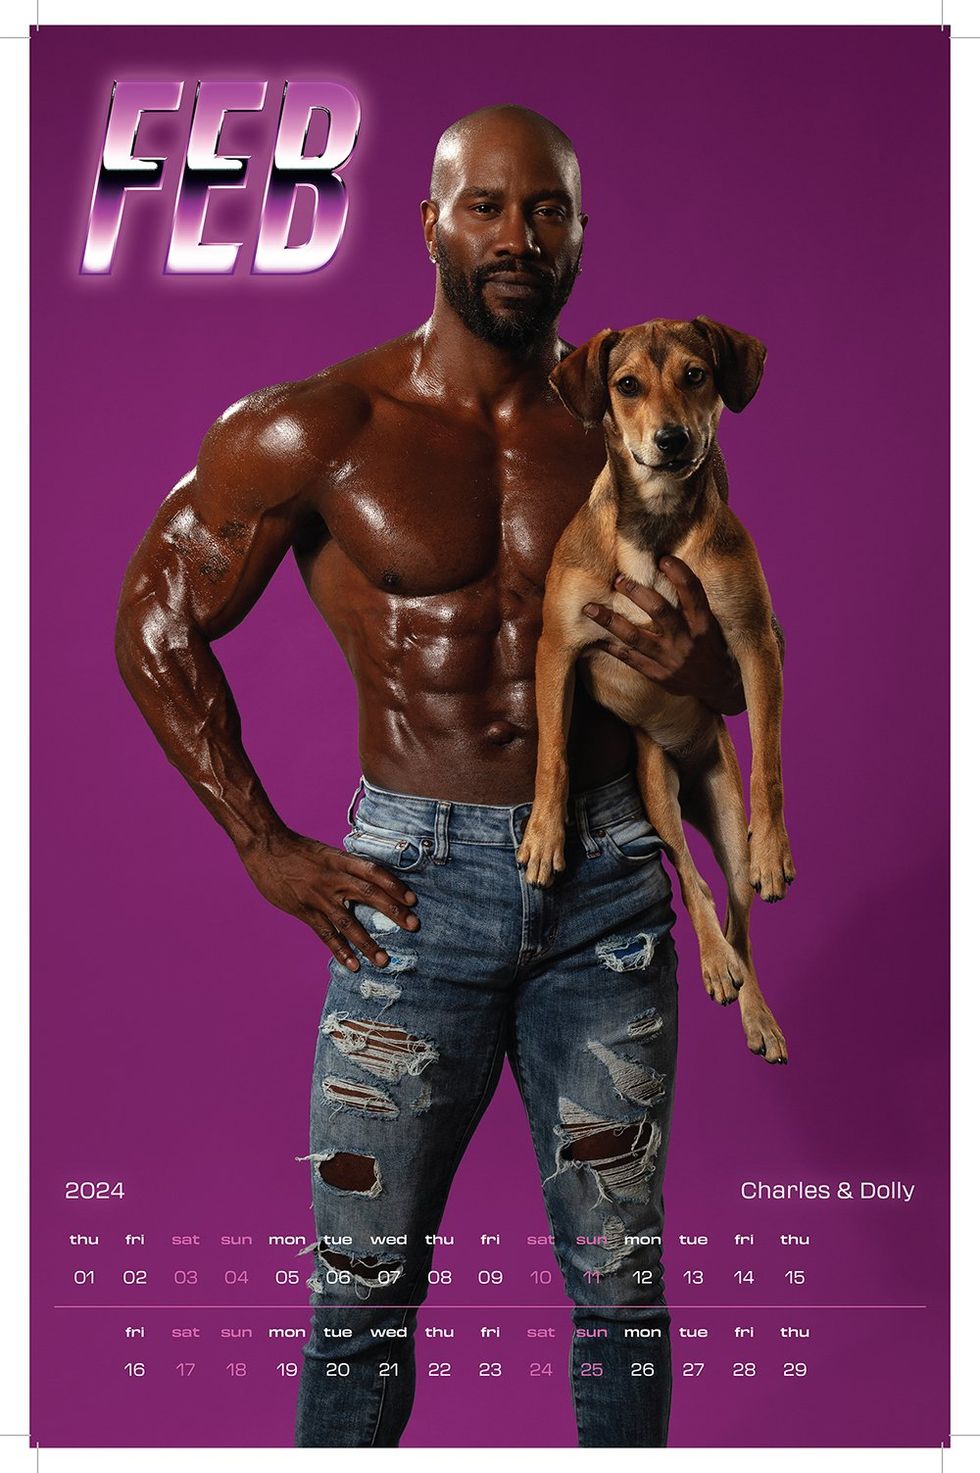 Get Ready to Pant and Beg for the New \u2018Hunks & Hounds\u2019 Calendar from Mike Ruiz \u2013 February \u2013 Charles and Dolly